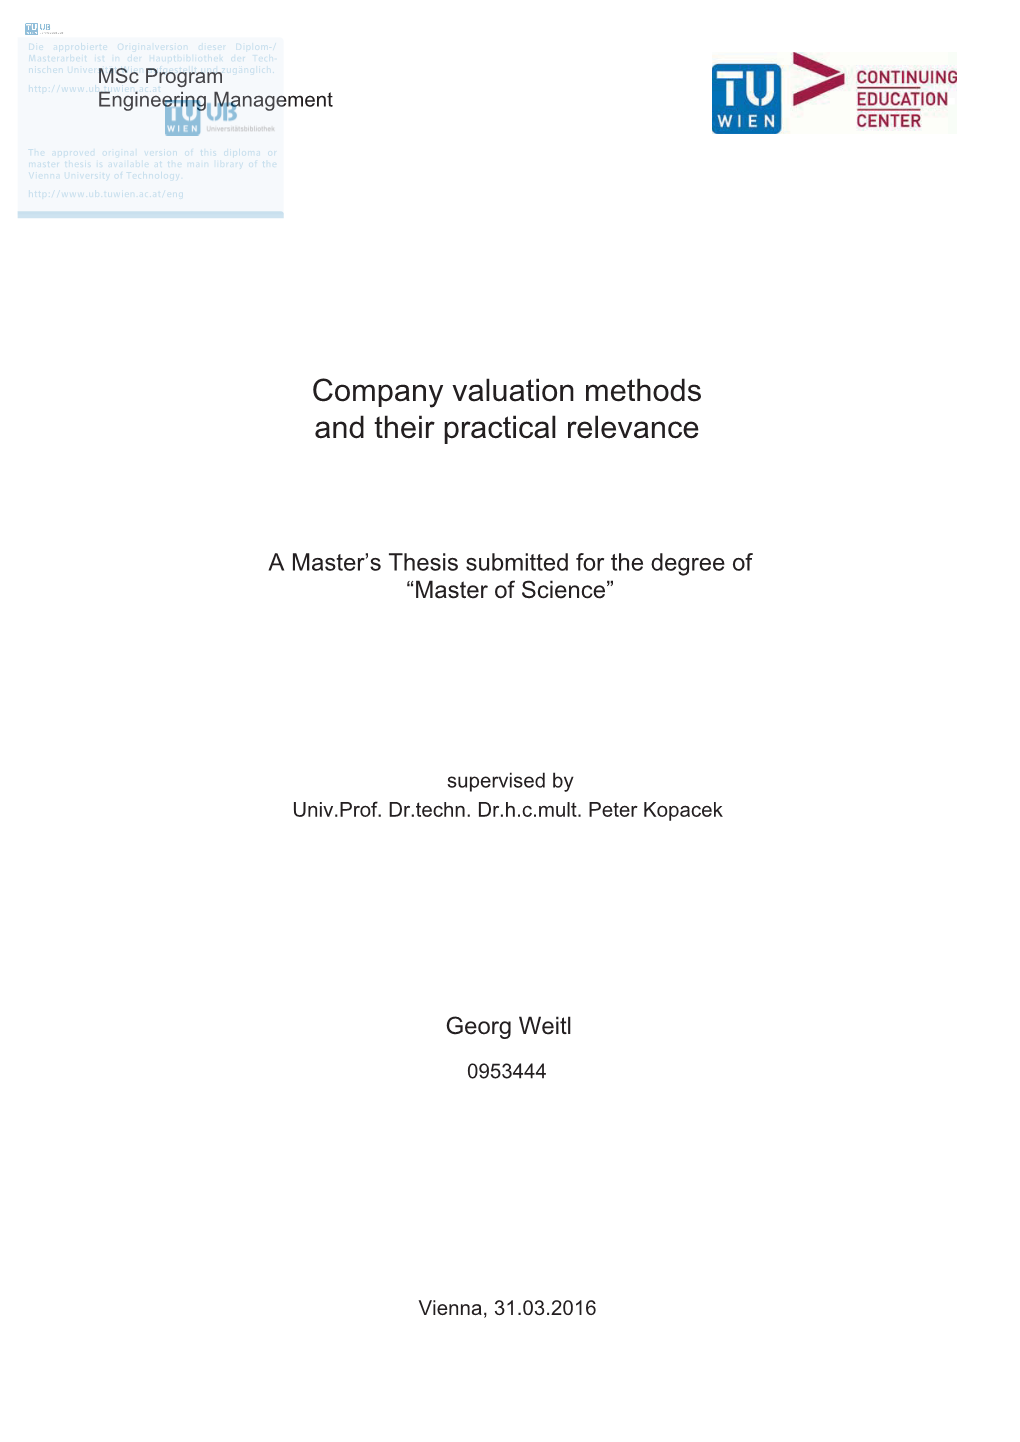 Company Valuation Methods and Their Practical Relevance